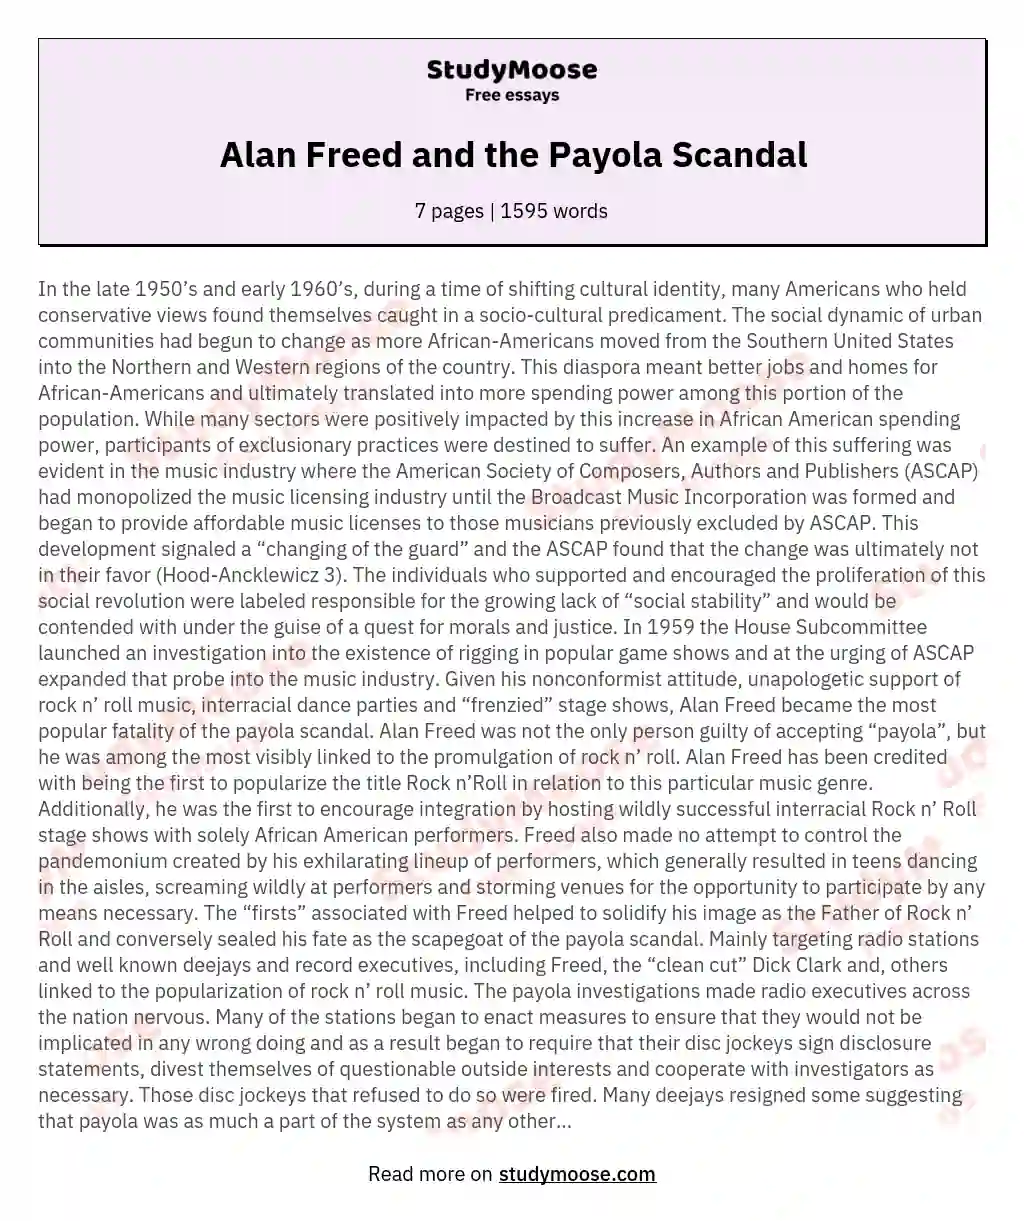 Alan Freed and the Payola Scandal essay